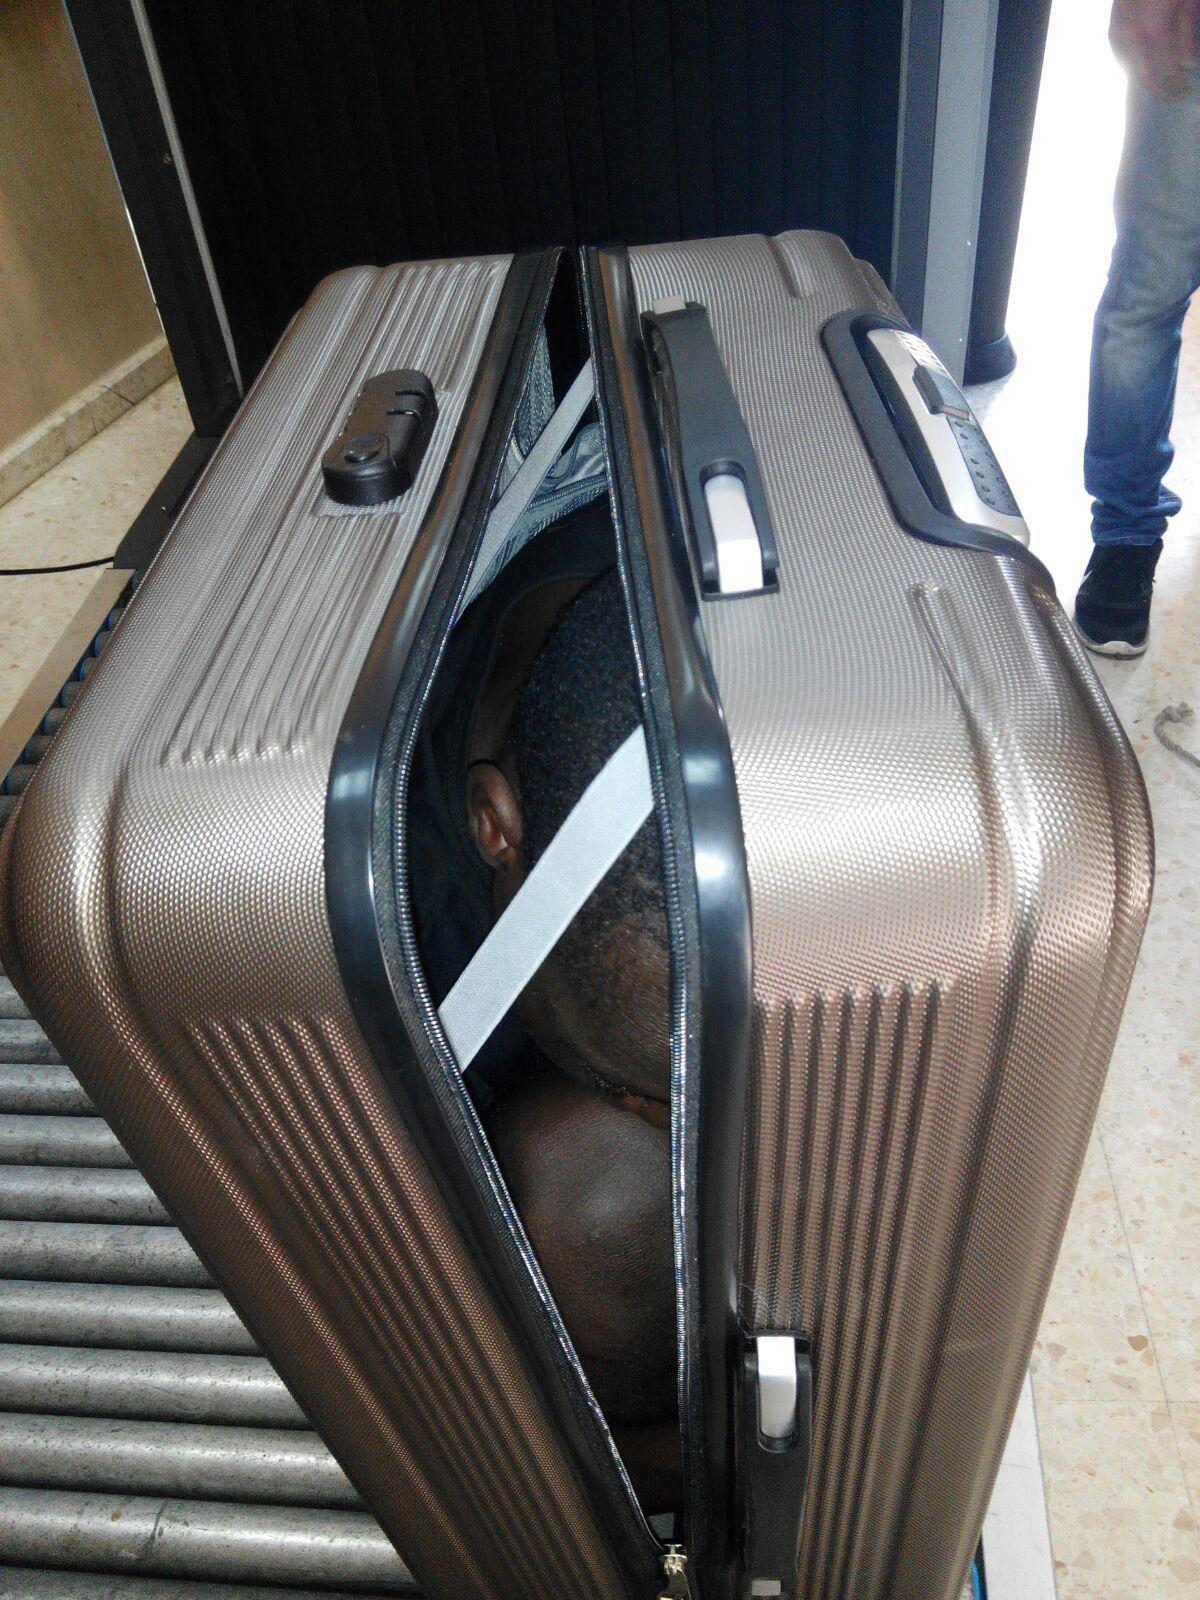 In this photo released by the Spanish Guardia Civil on Tuesday, Jan. 3, 2017, a 19 year-old migrant from Gabon is photographed in a suitcase, in Ceuta, Spain. (AP Photo/Spanish Interior Ministry, via AP)